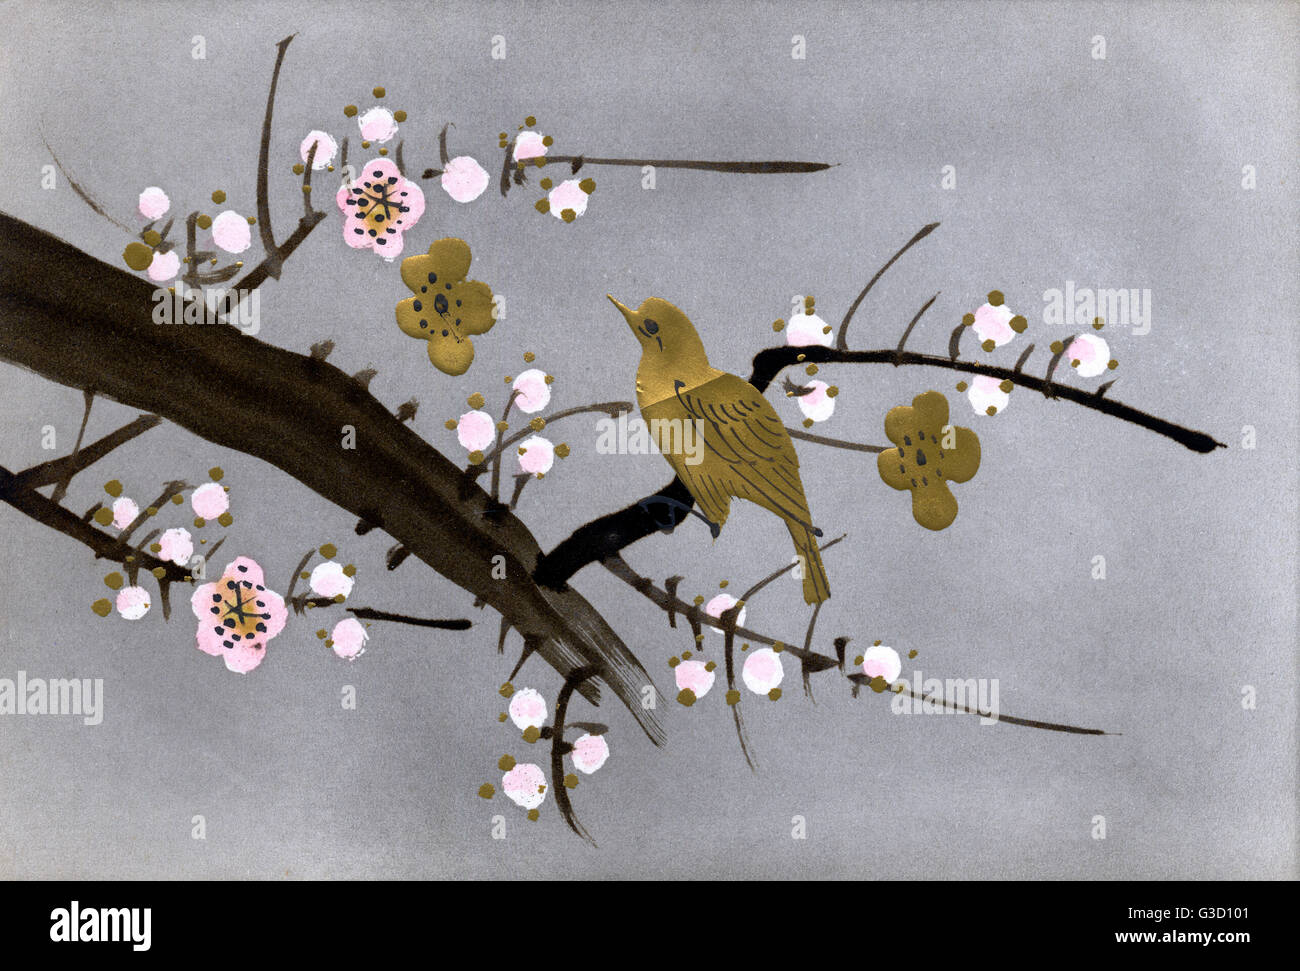 Japanese art postcard - Golden bird perched in blossom tree Stock Photo